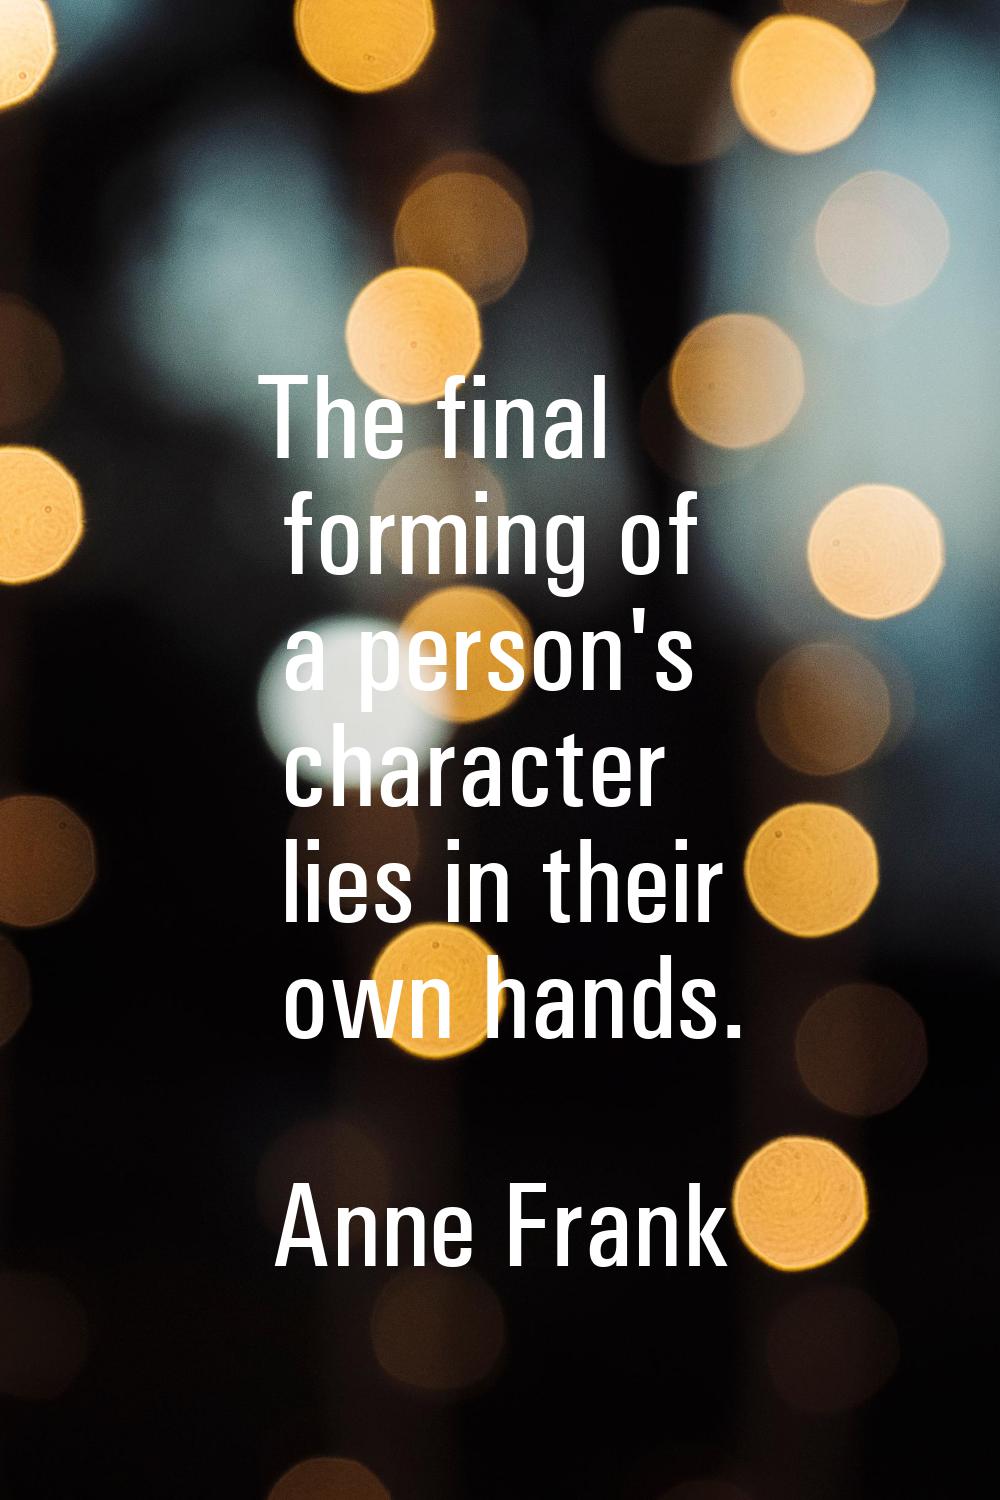 The final forming of a person's character lies in their own hands.